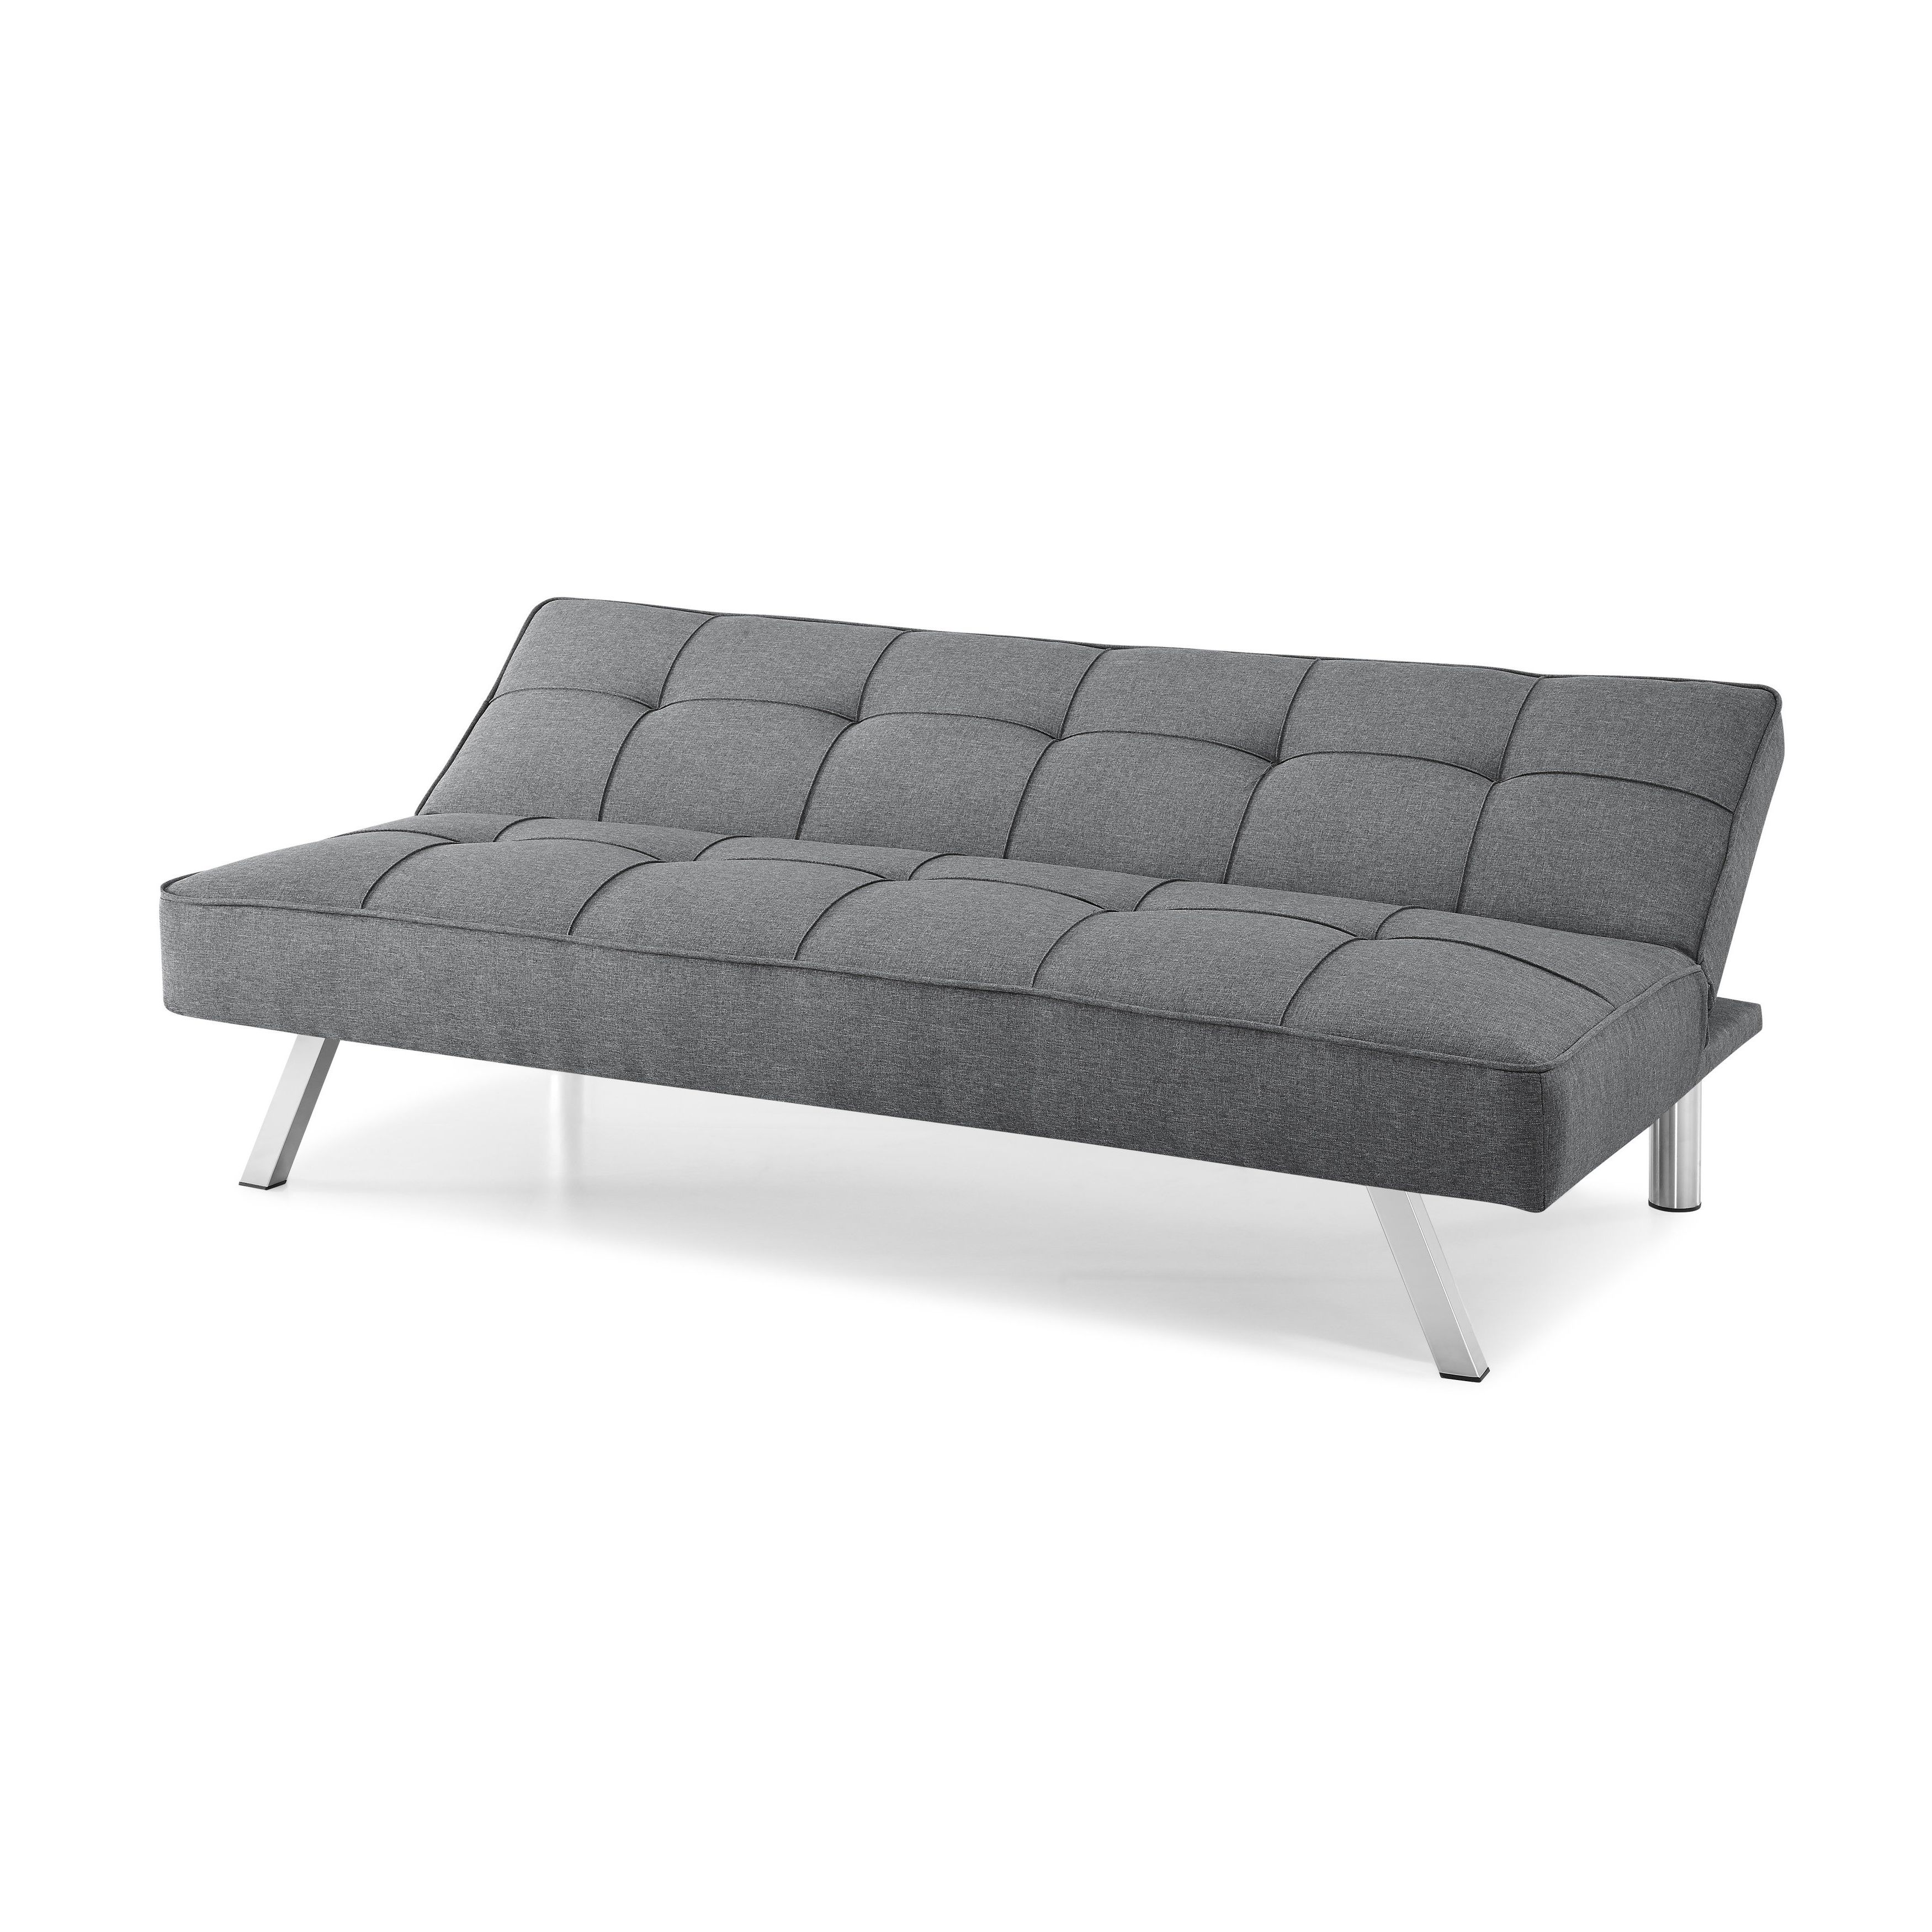 Well Known Cohen Foam Oversized Sofa Chairs Regarding Shop Serta Charlie Tufted Grey Upholstered Convertible Sofa – Free (View 20 of 20)